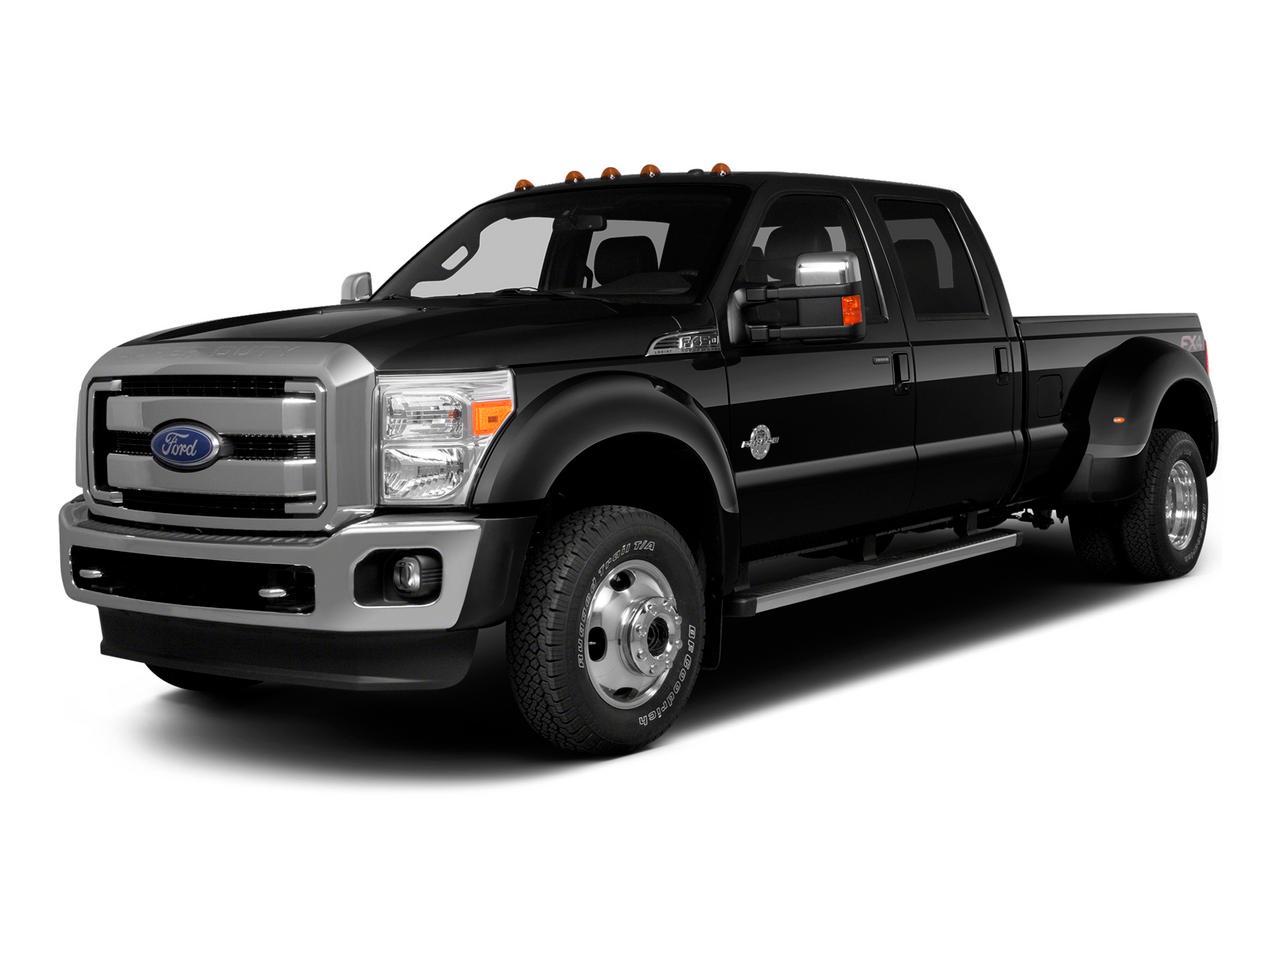 2015 Ford Super Duty F-450 DRW Vehicle Photo in Pilot Point, TX 76258-6053